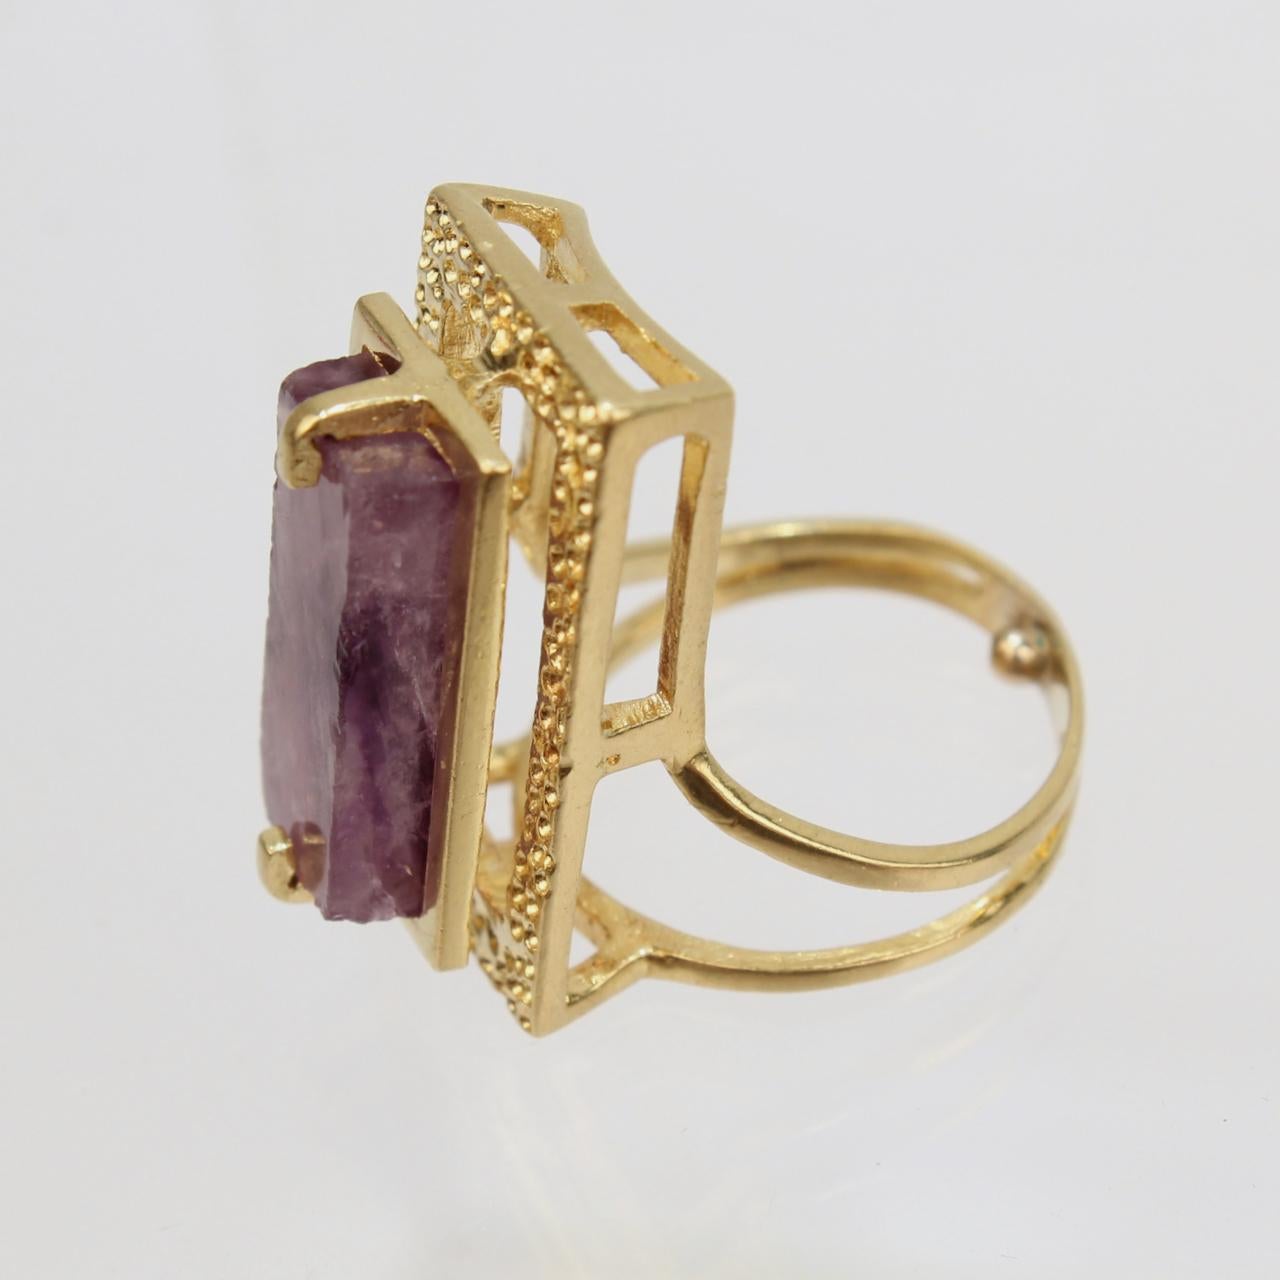 Modernist Asymmetrical 18k Gold and Rough Cut Amethyst Gemstone Cocktail Ring For Sale 1